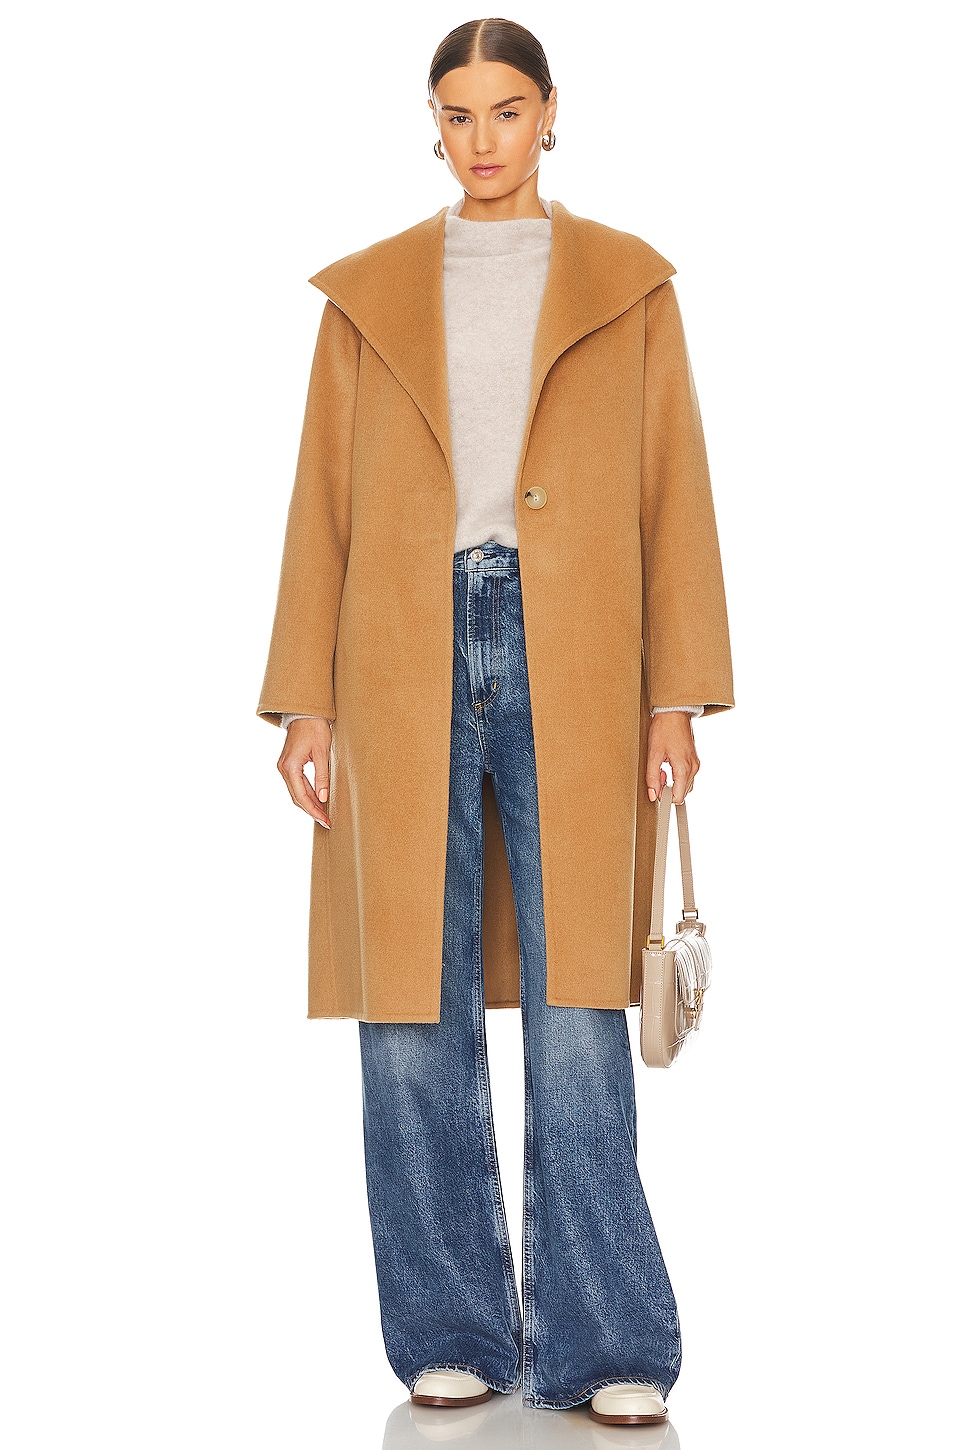 Vince Belted Coat in in Almond